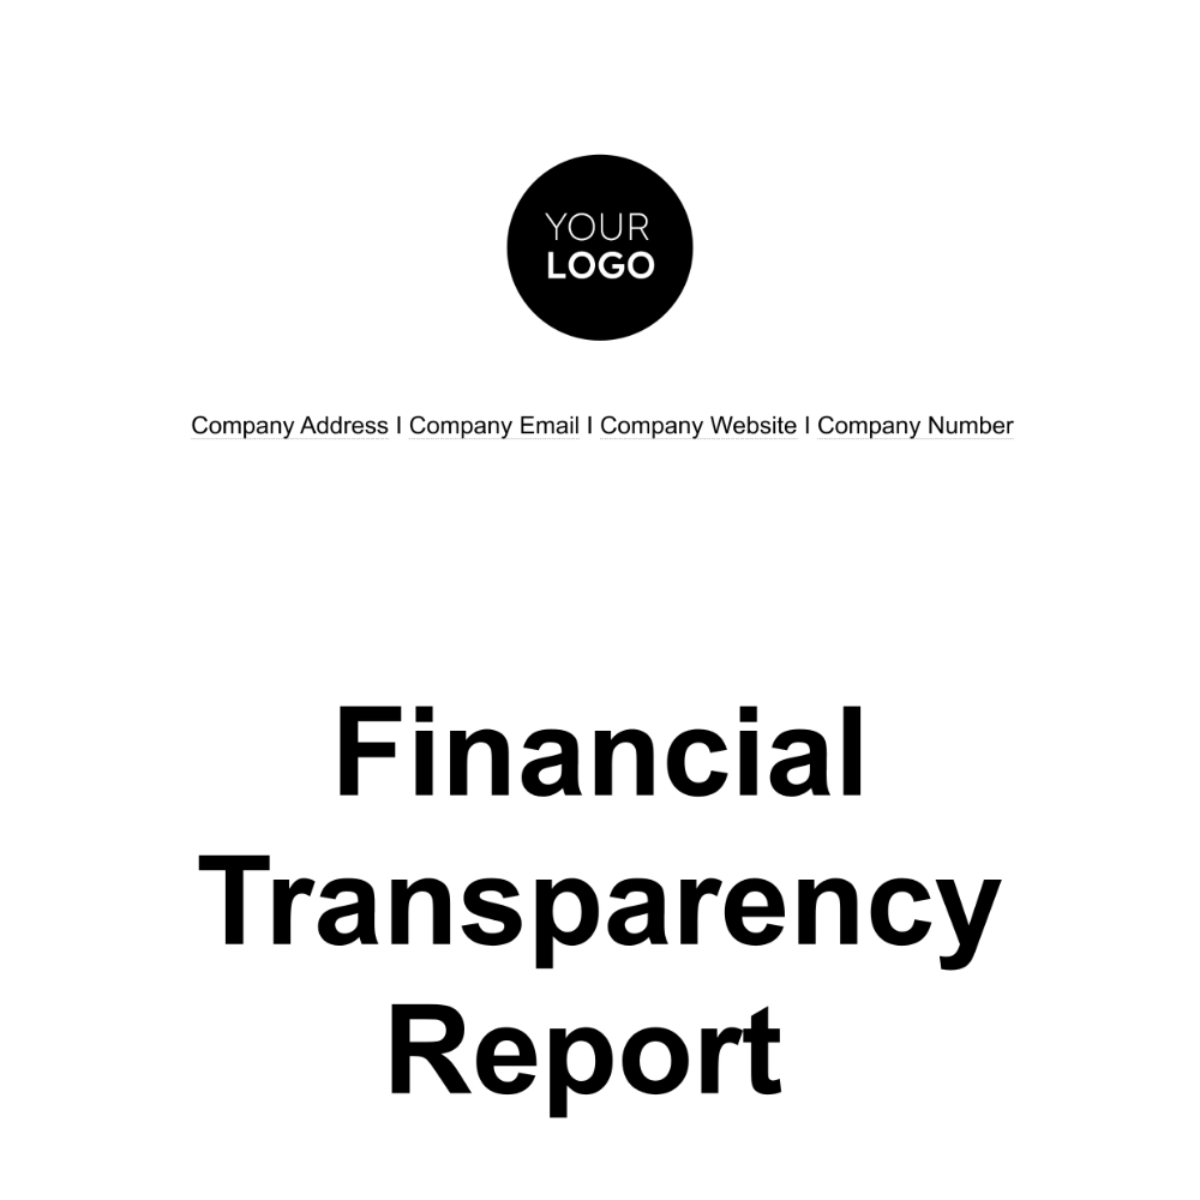 Financial Transparency Report Template